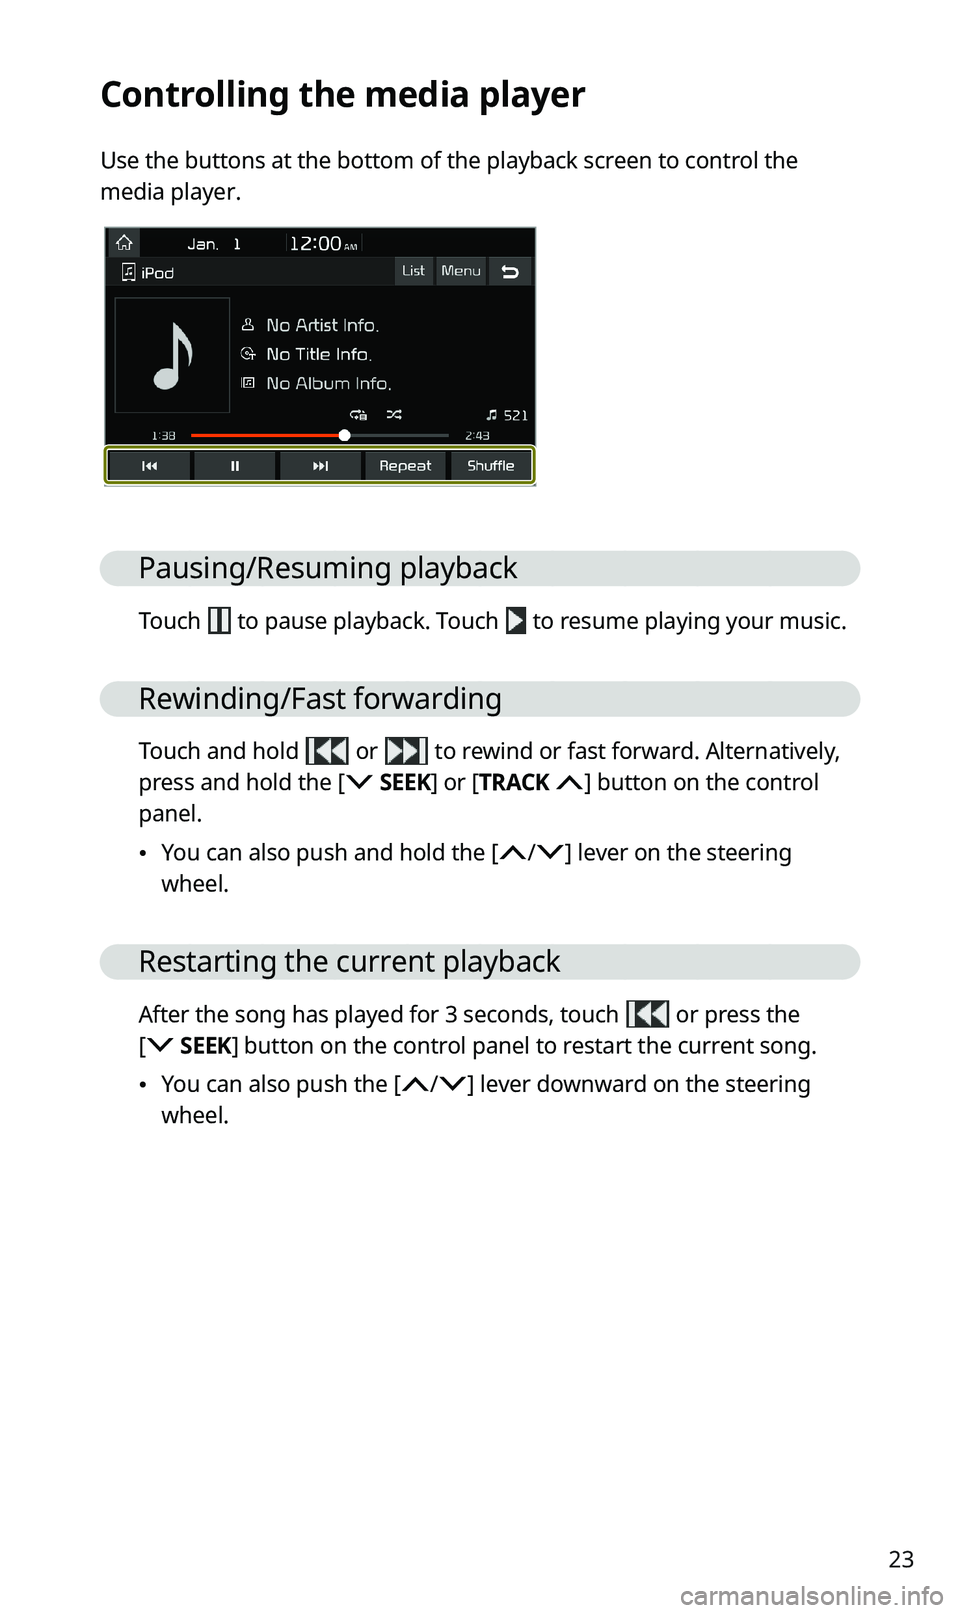 KIA SPORTAGE 2020  Quick Reference Guide 23
Controlling the media player
Use the buttons at the bottom of the playback screen to control the 
media player.
Pausing/Resuming playback
Touch  to pause playback. Touch  to resume playing your mus